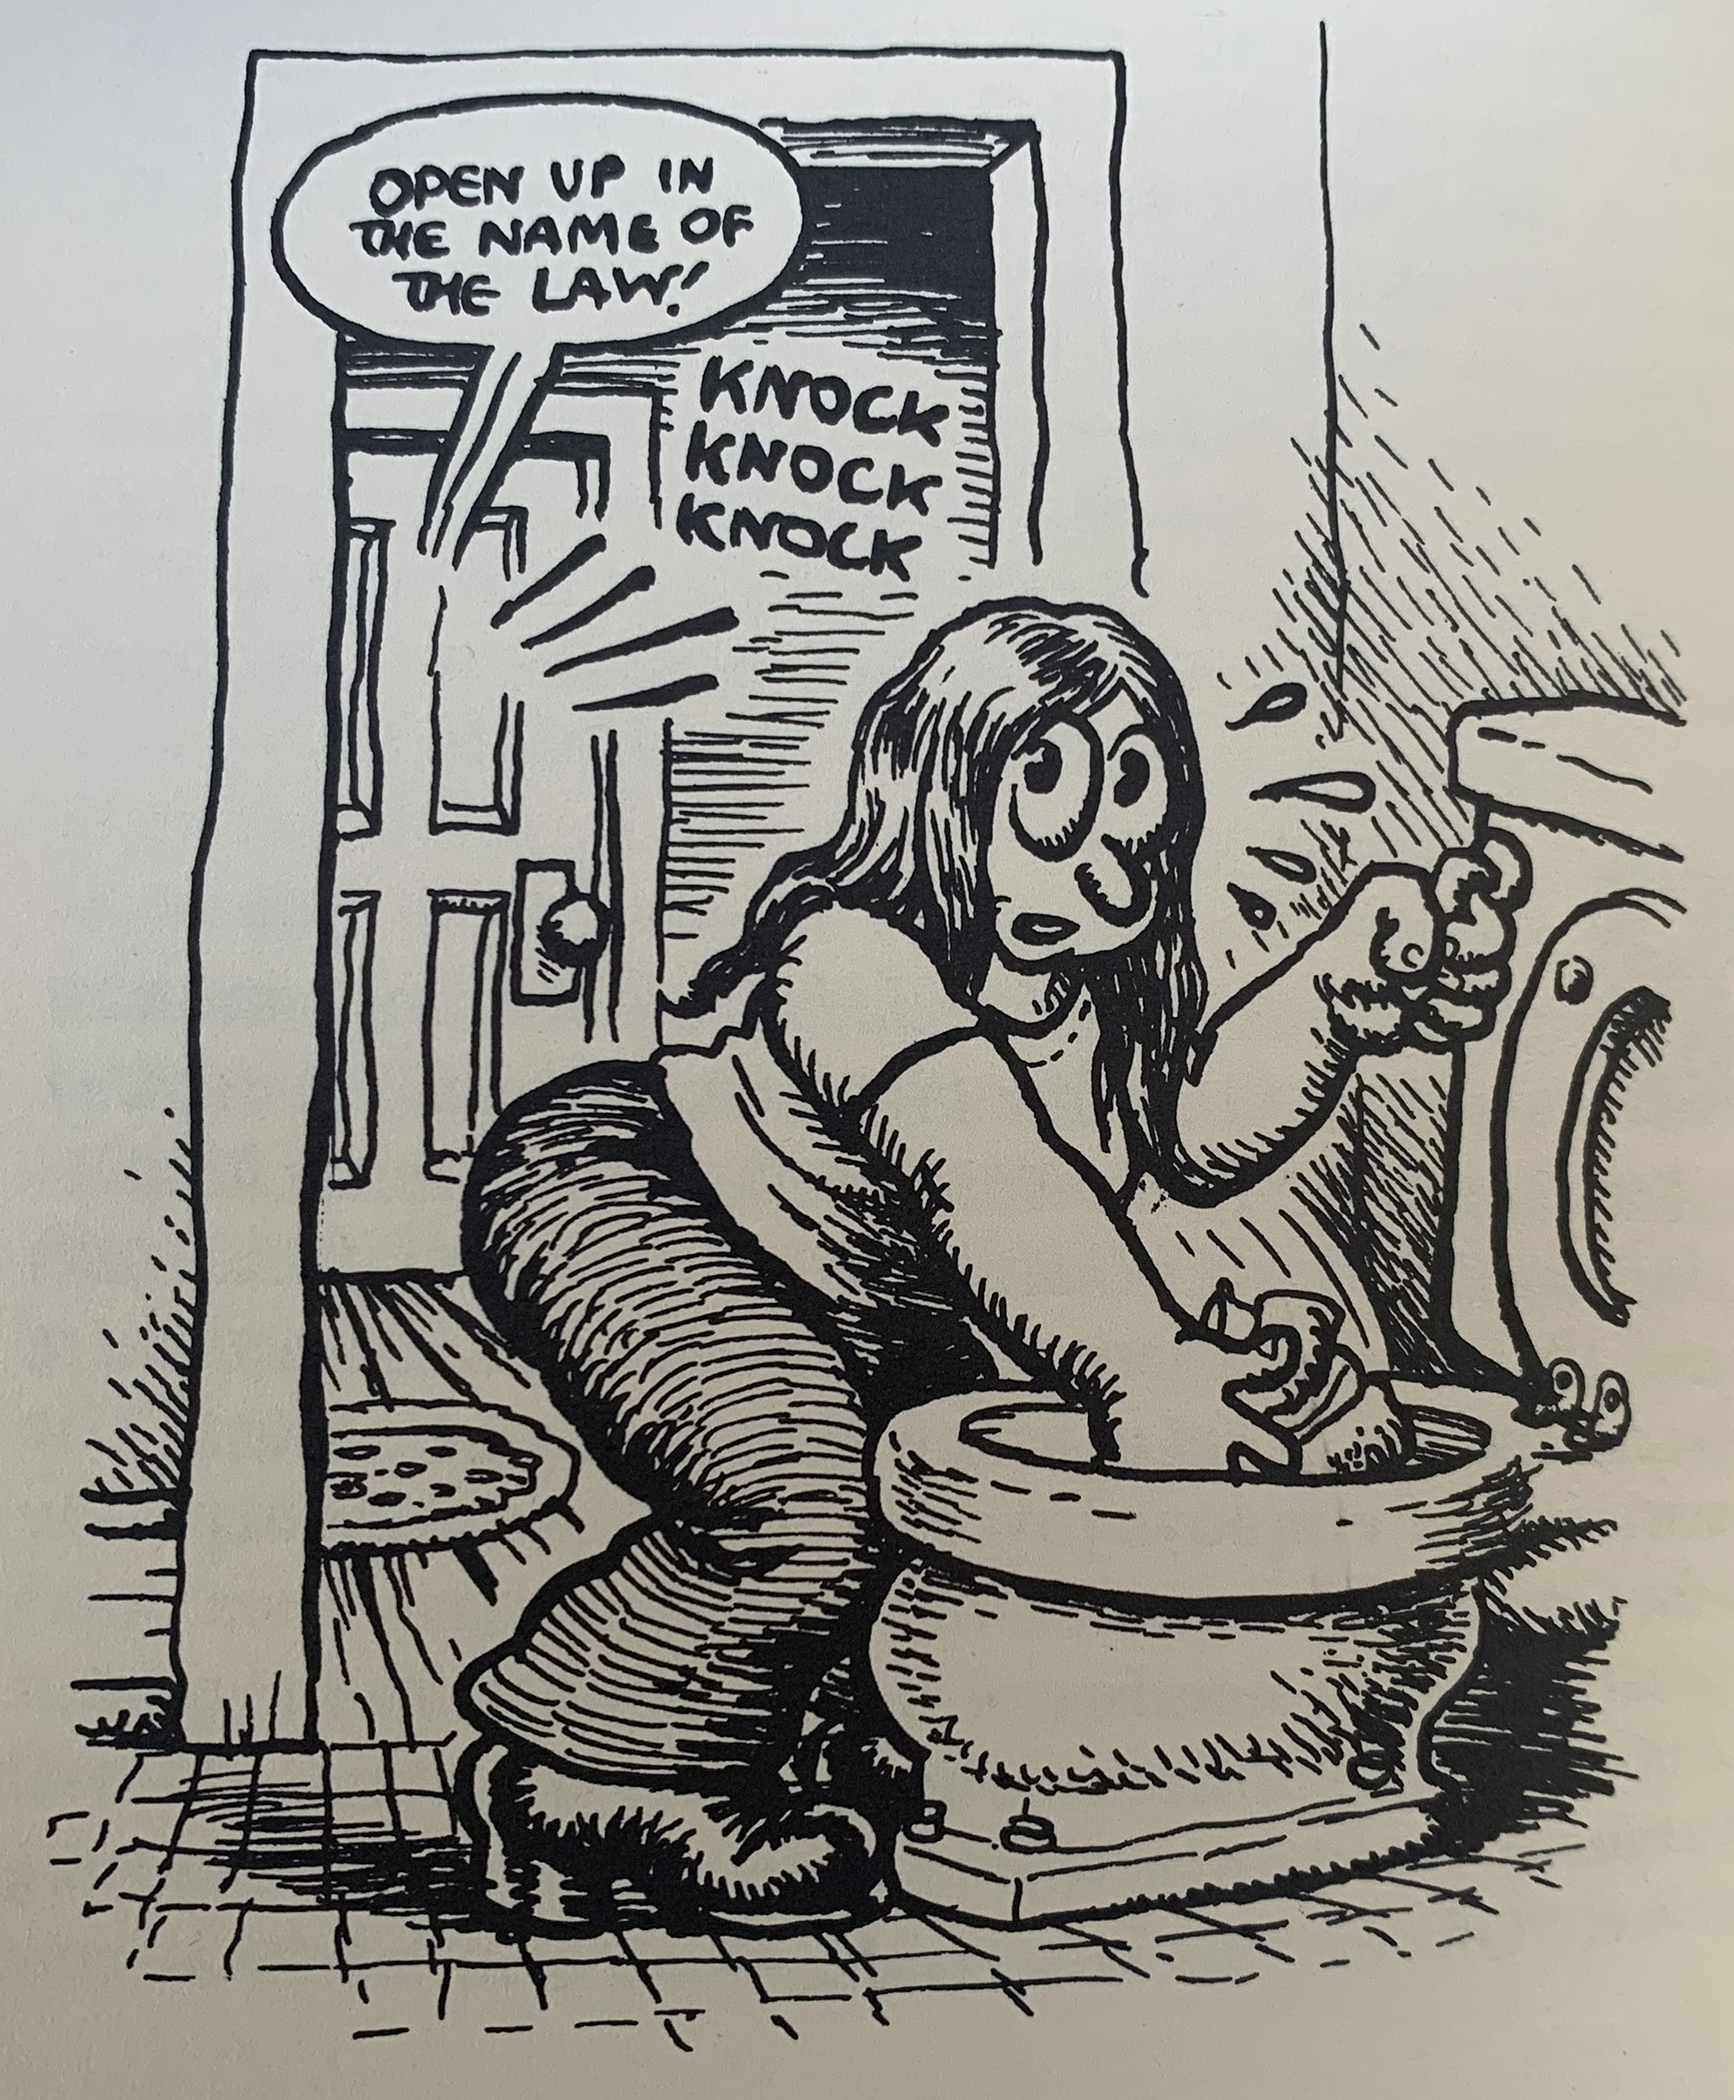 Zap! Feast Your Eyes on 12 Rare, Original R. Crumb Dope Comix